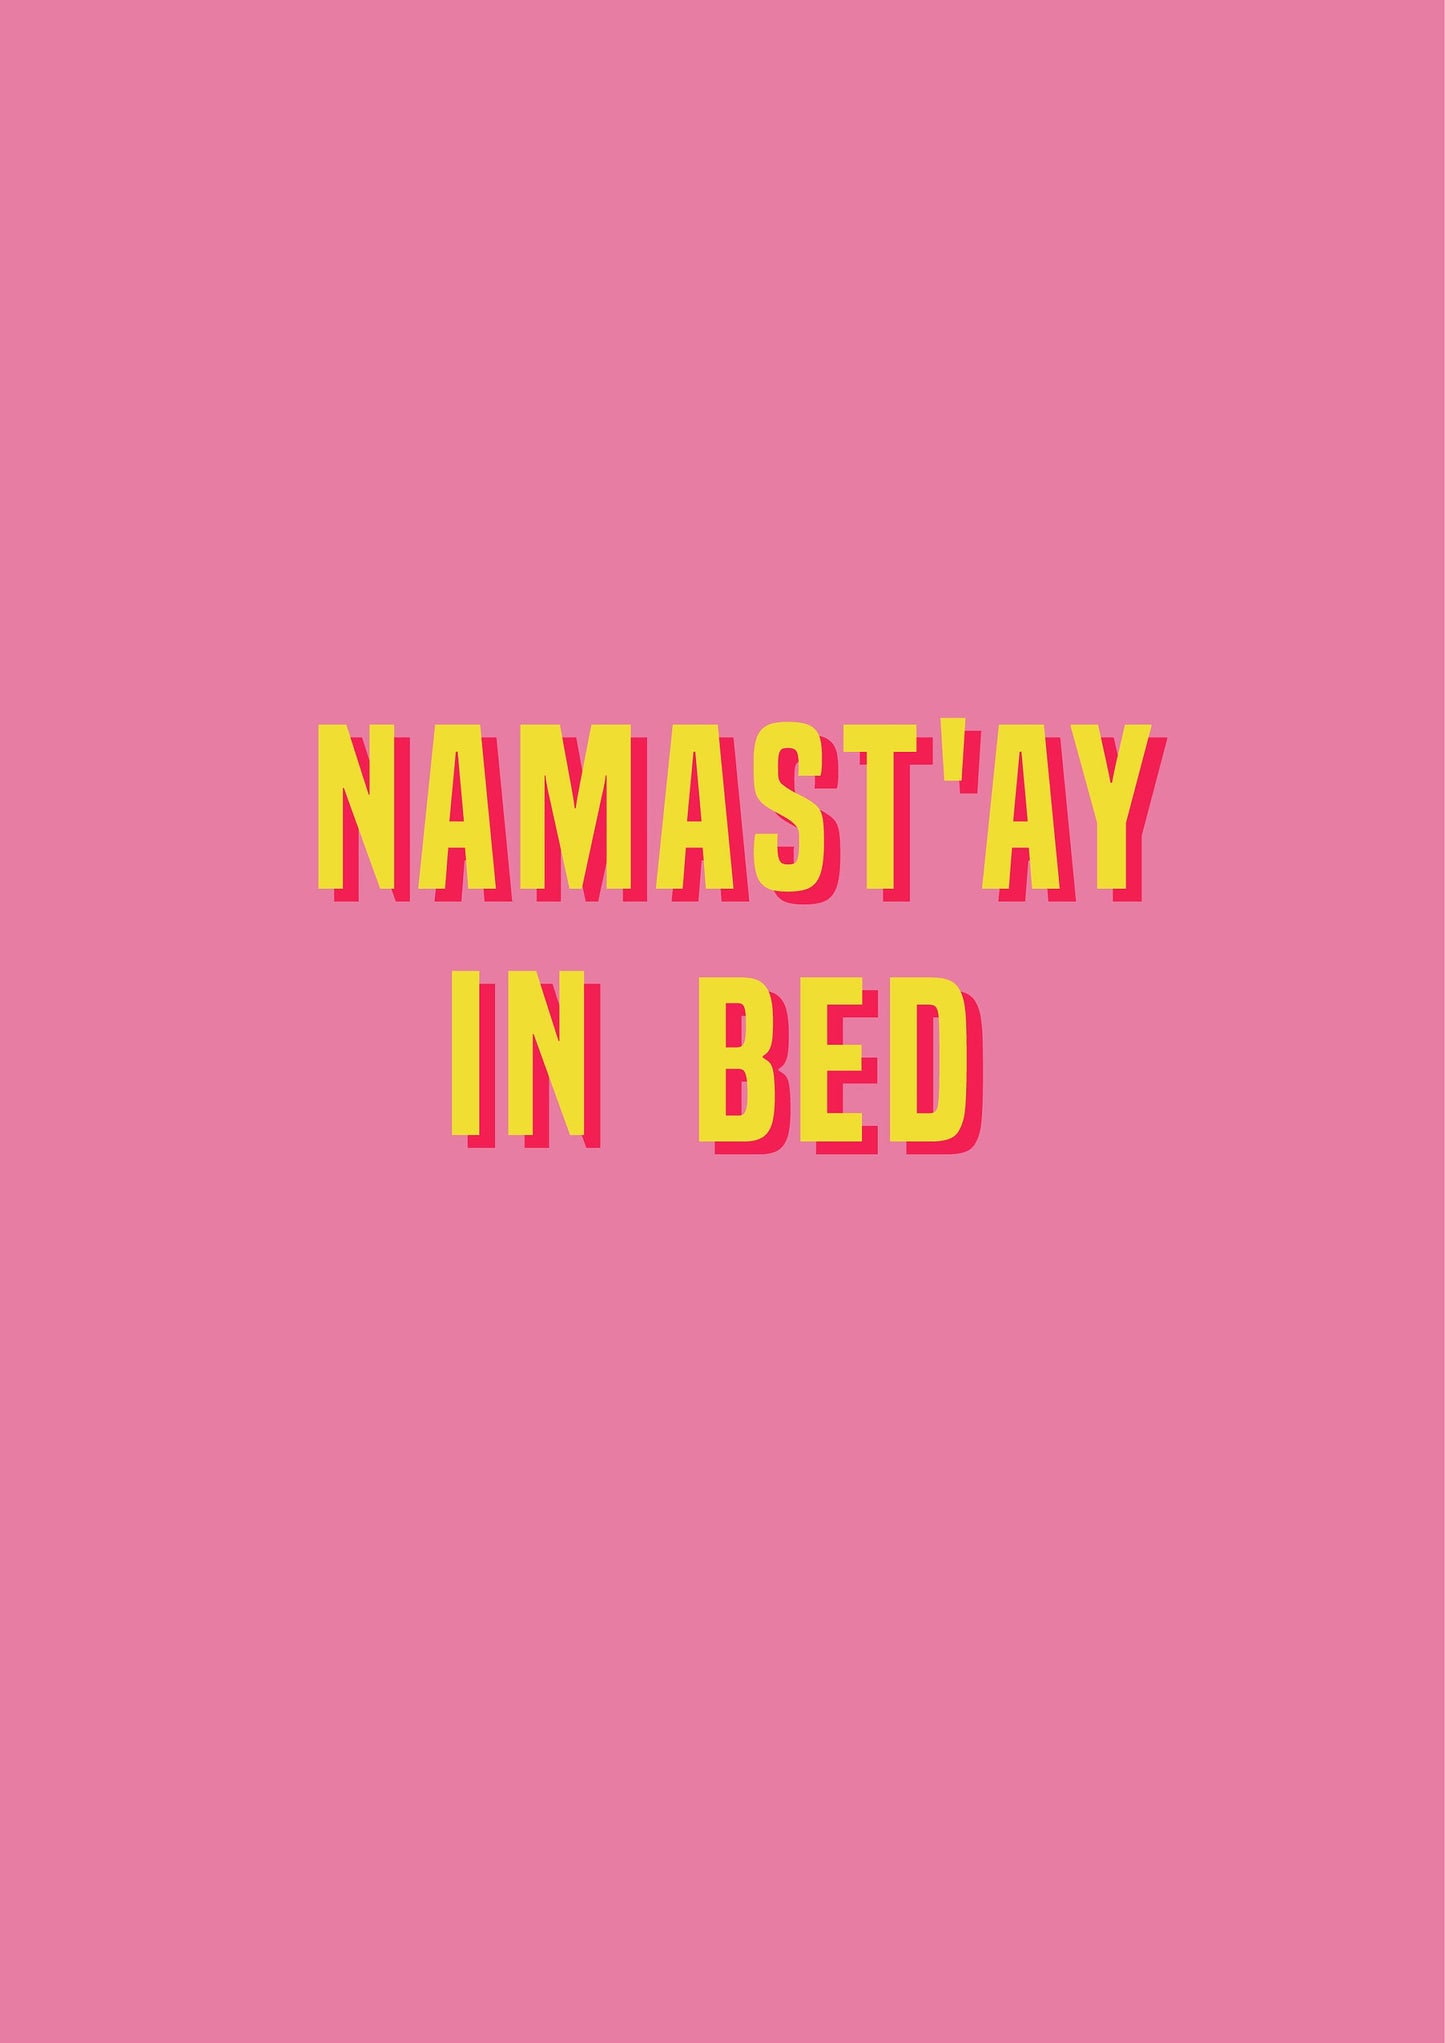 Namastay in Bed Bedroom Funny Quote Typography Print